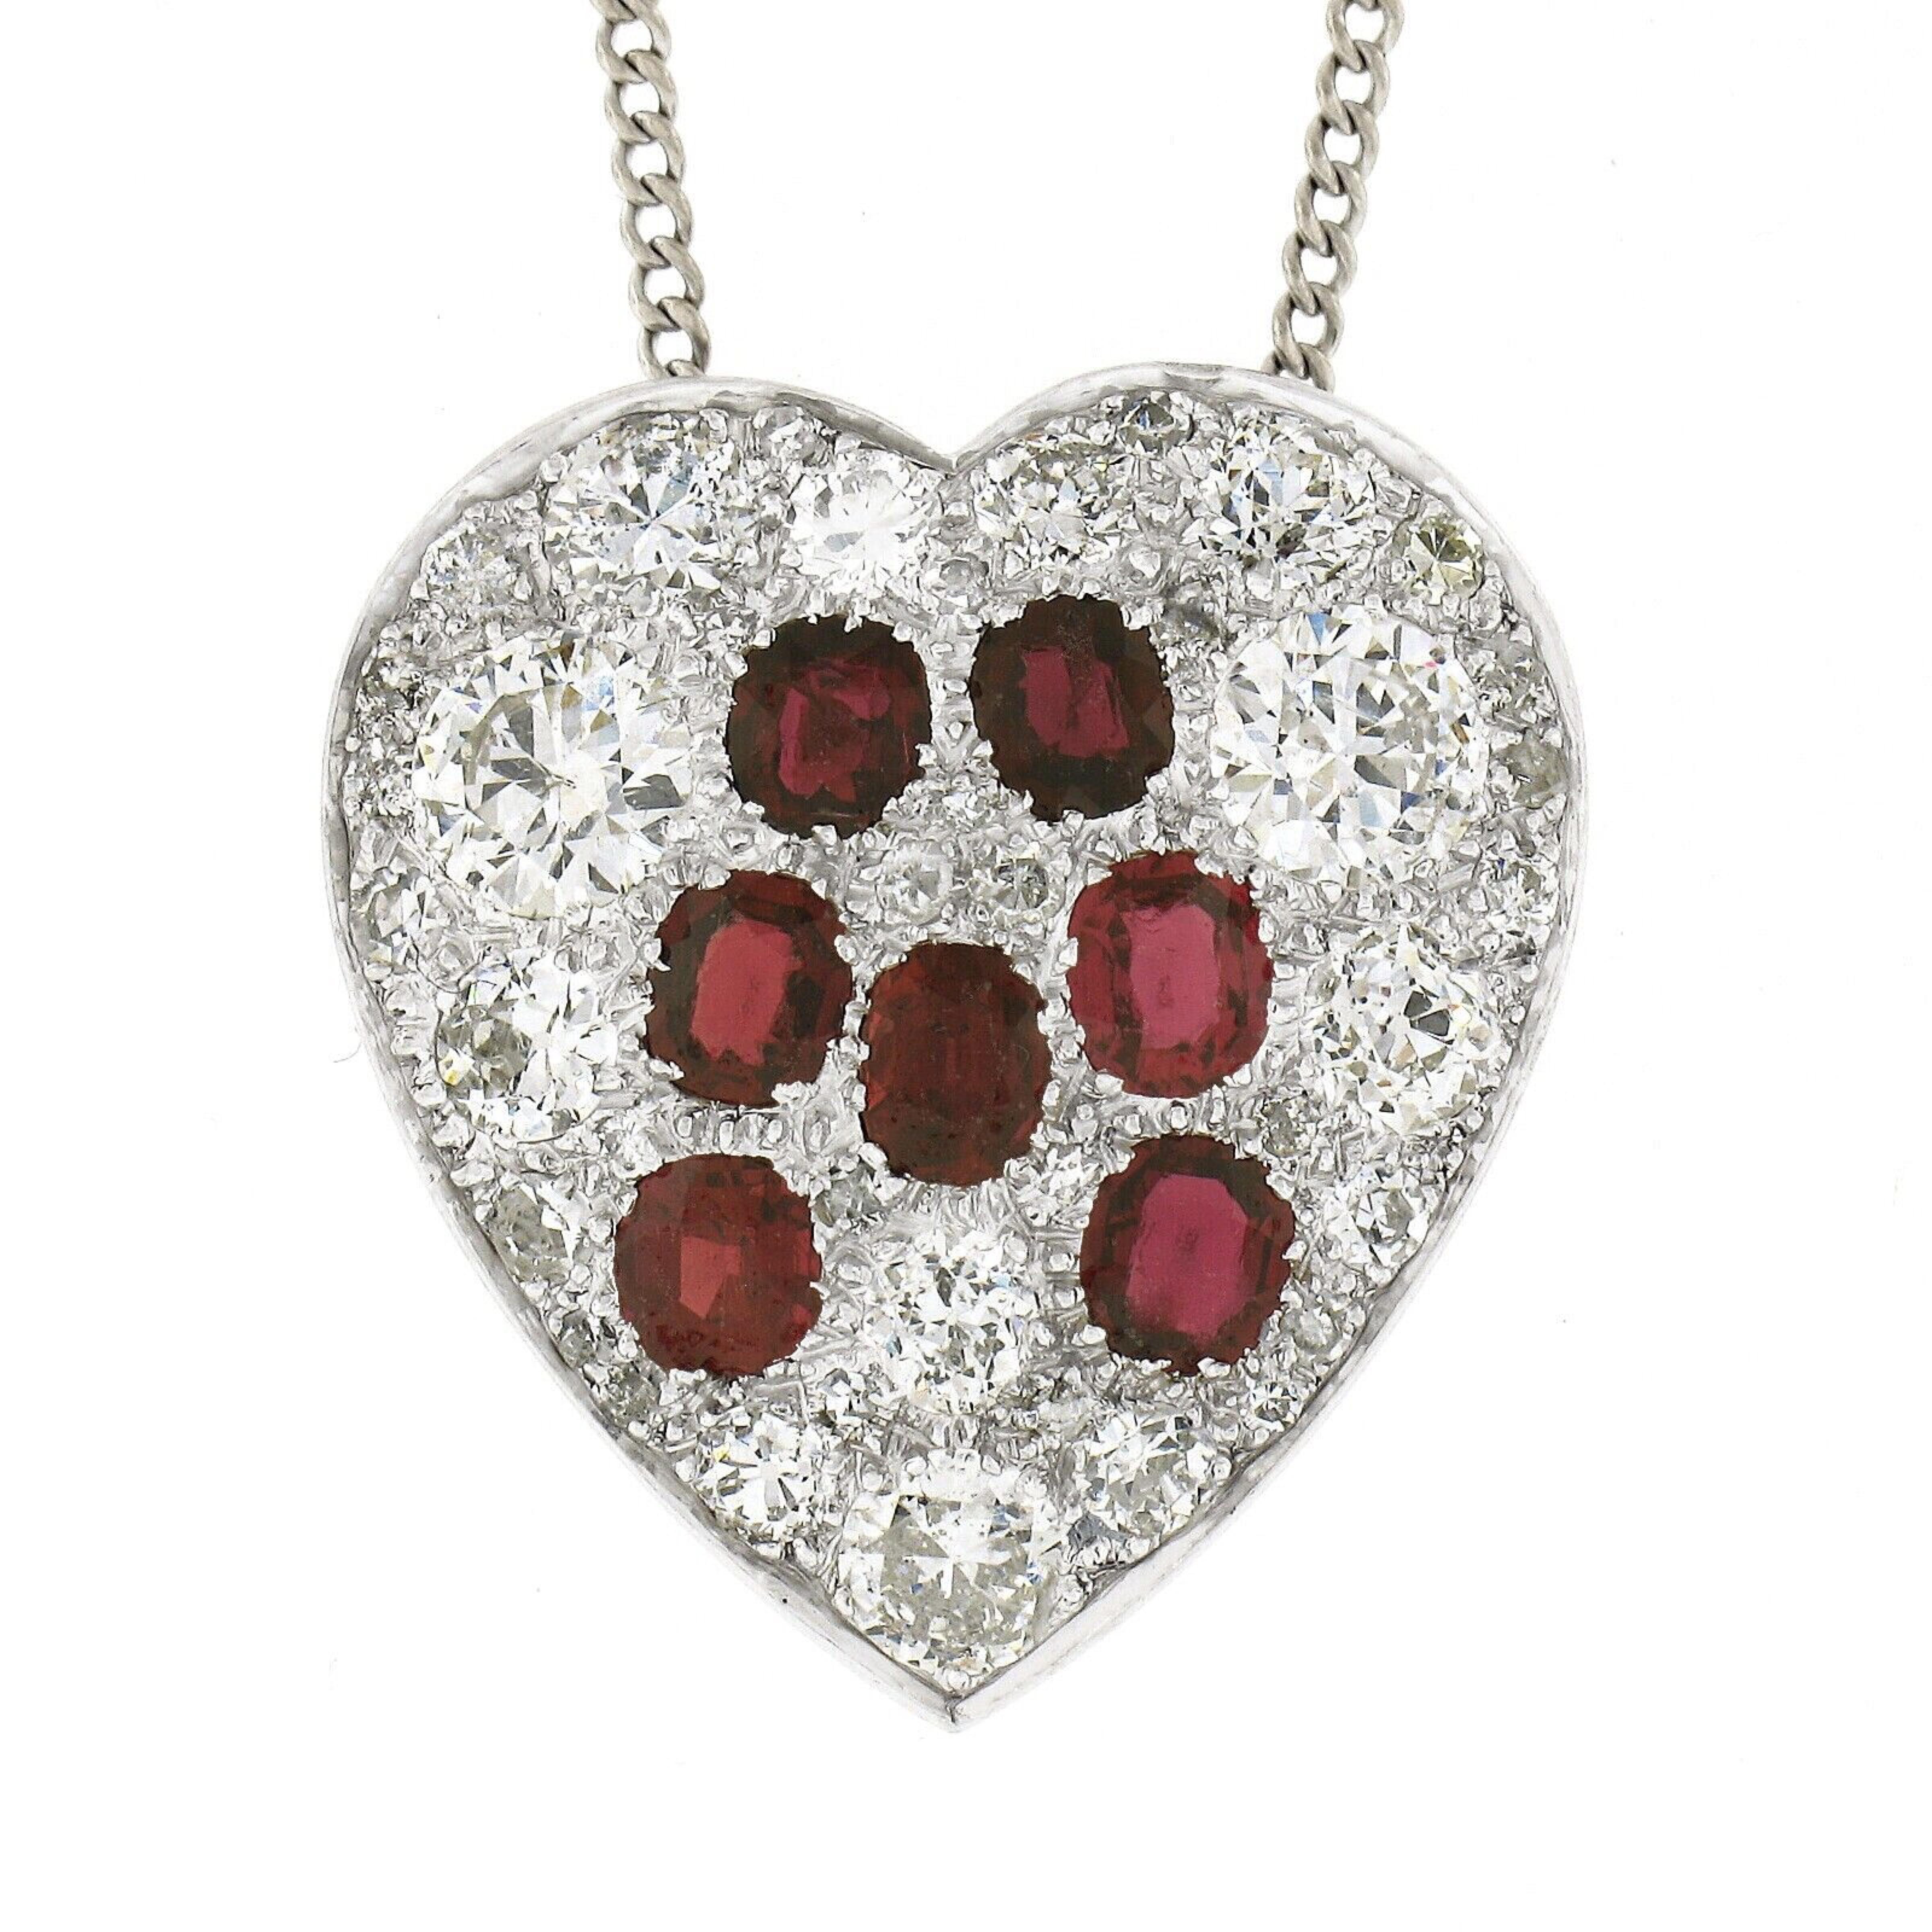 This breathtaking antique pendant was crafted in solid platinum during the 1930-40's and features a large and slightly domed heart shaped pendant that is completely drenched in fine quality rubies and diamonds throughout. The 7 old oval cut rubies